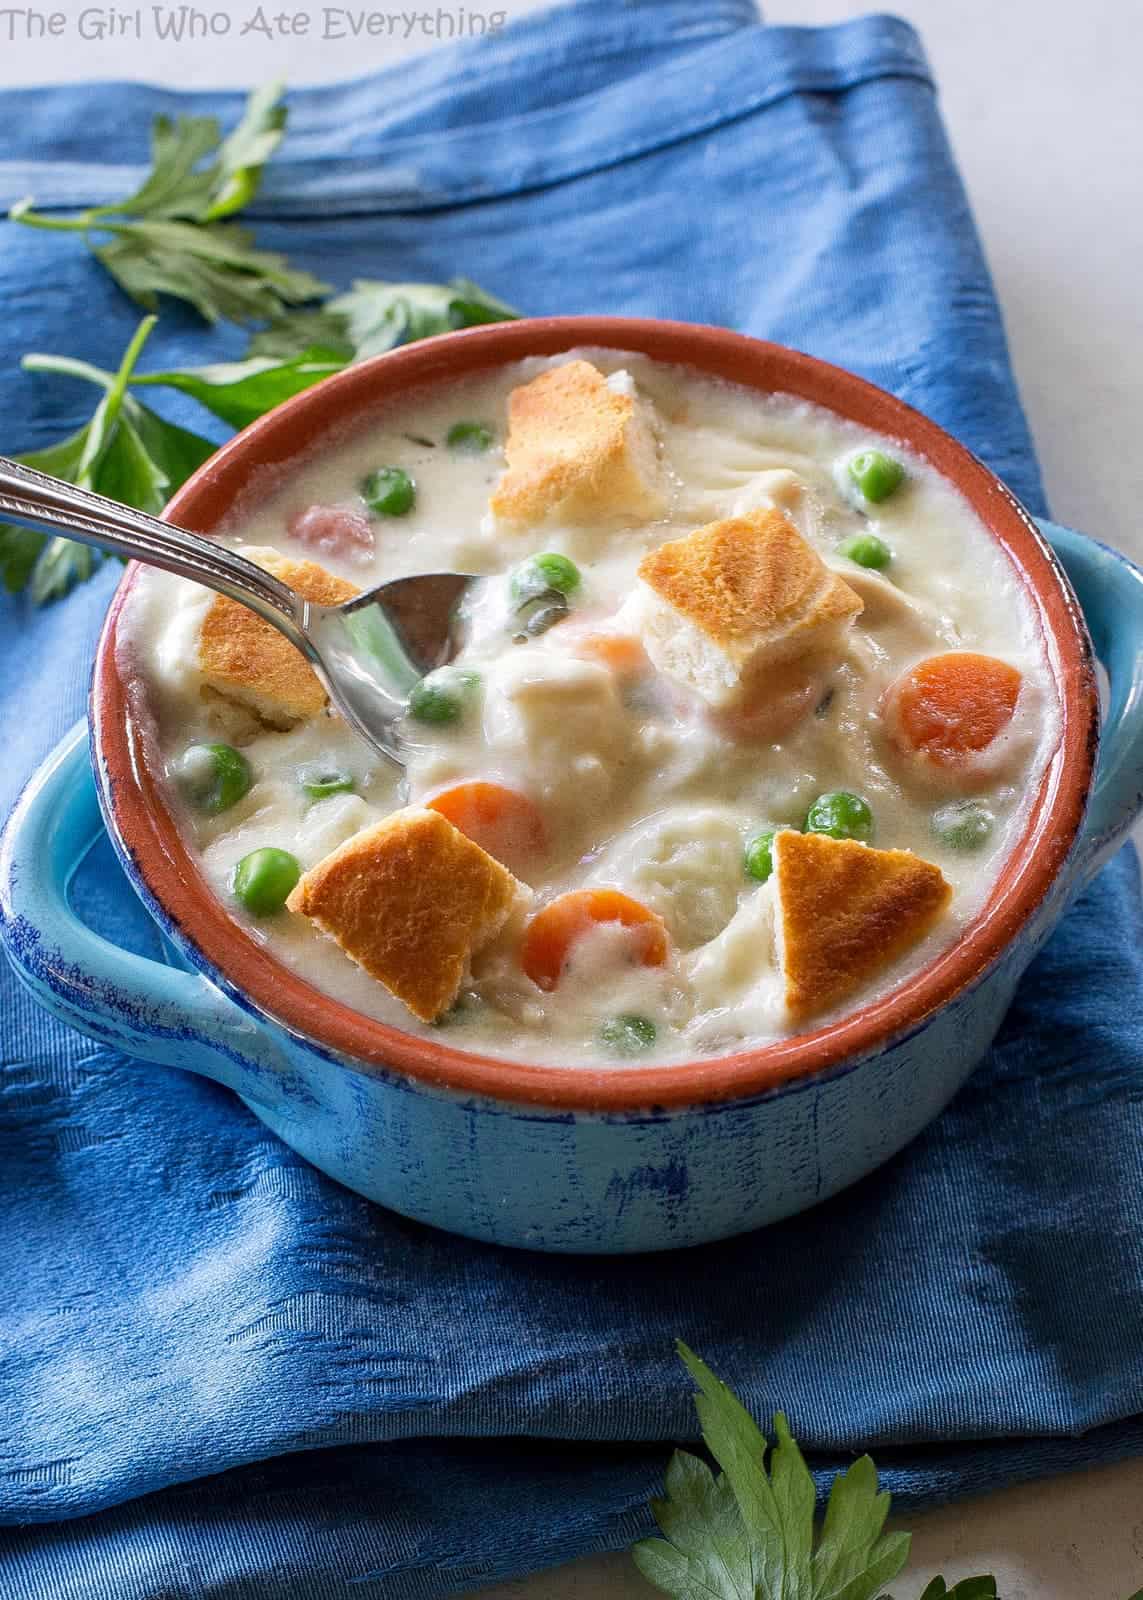 https://www.the-girl-who-ate-everything.com/wp-content/uploads/2017/03/chicken-pot-pie-soup-8.jpg